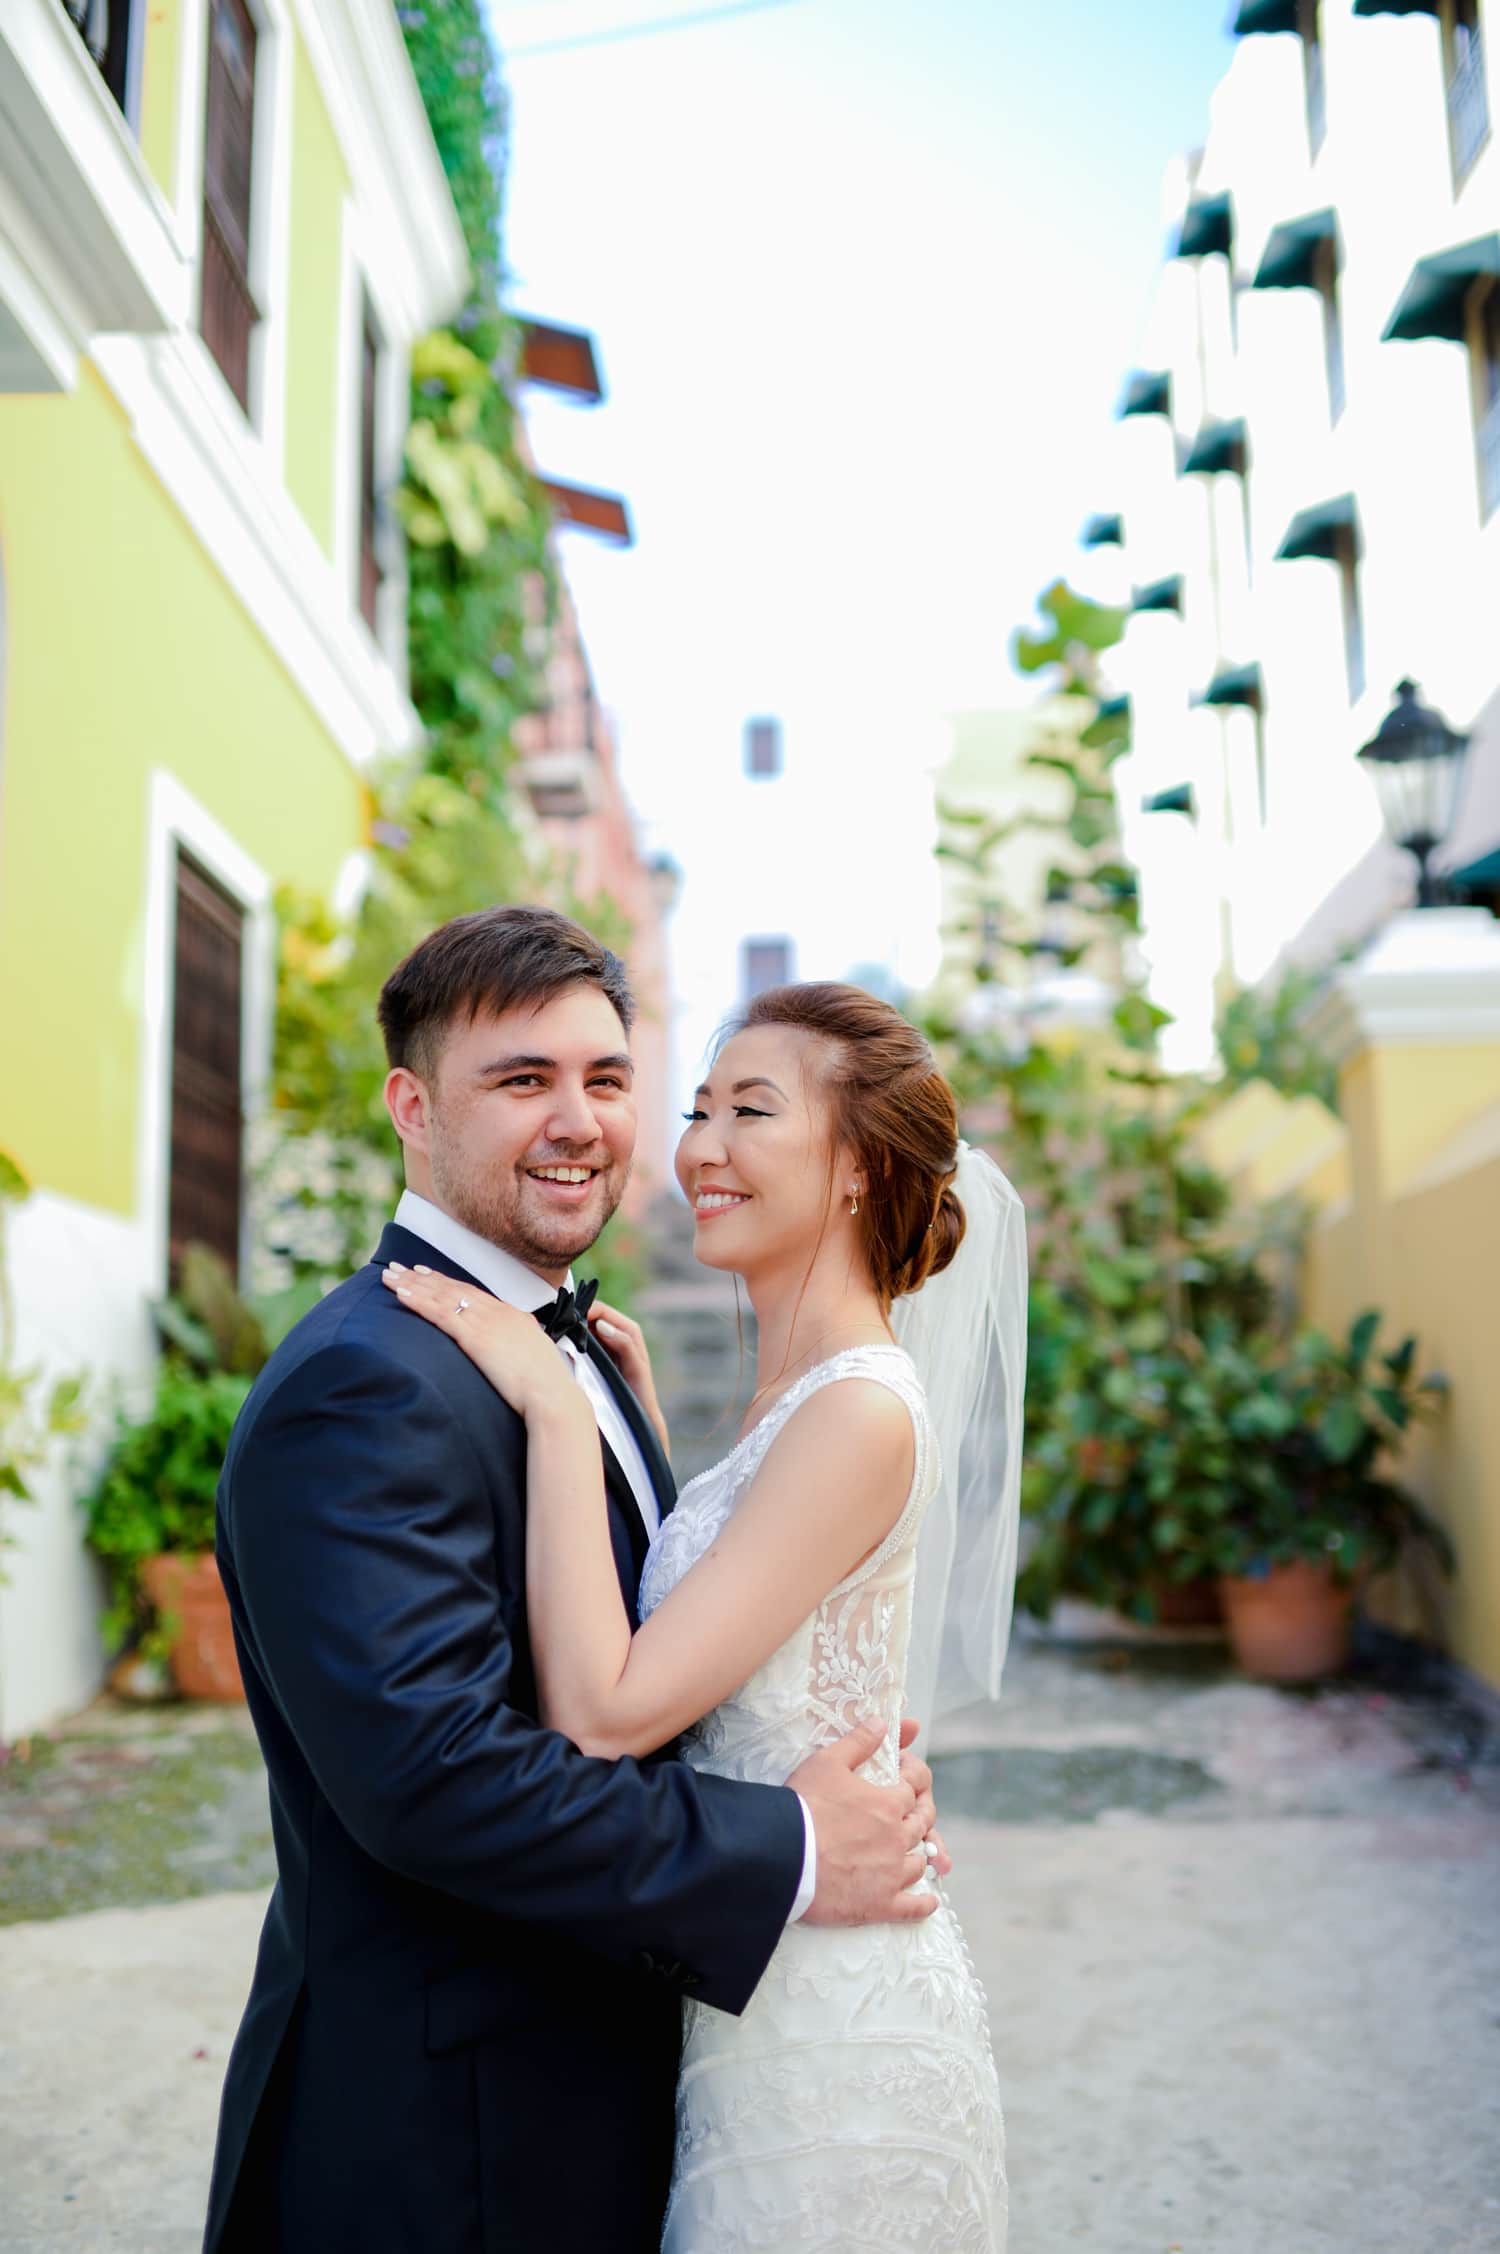 Puerto Rico wedding photographer Camille Fontanez shares an elopement portrait session in Old San Juan